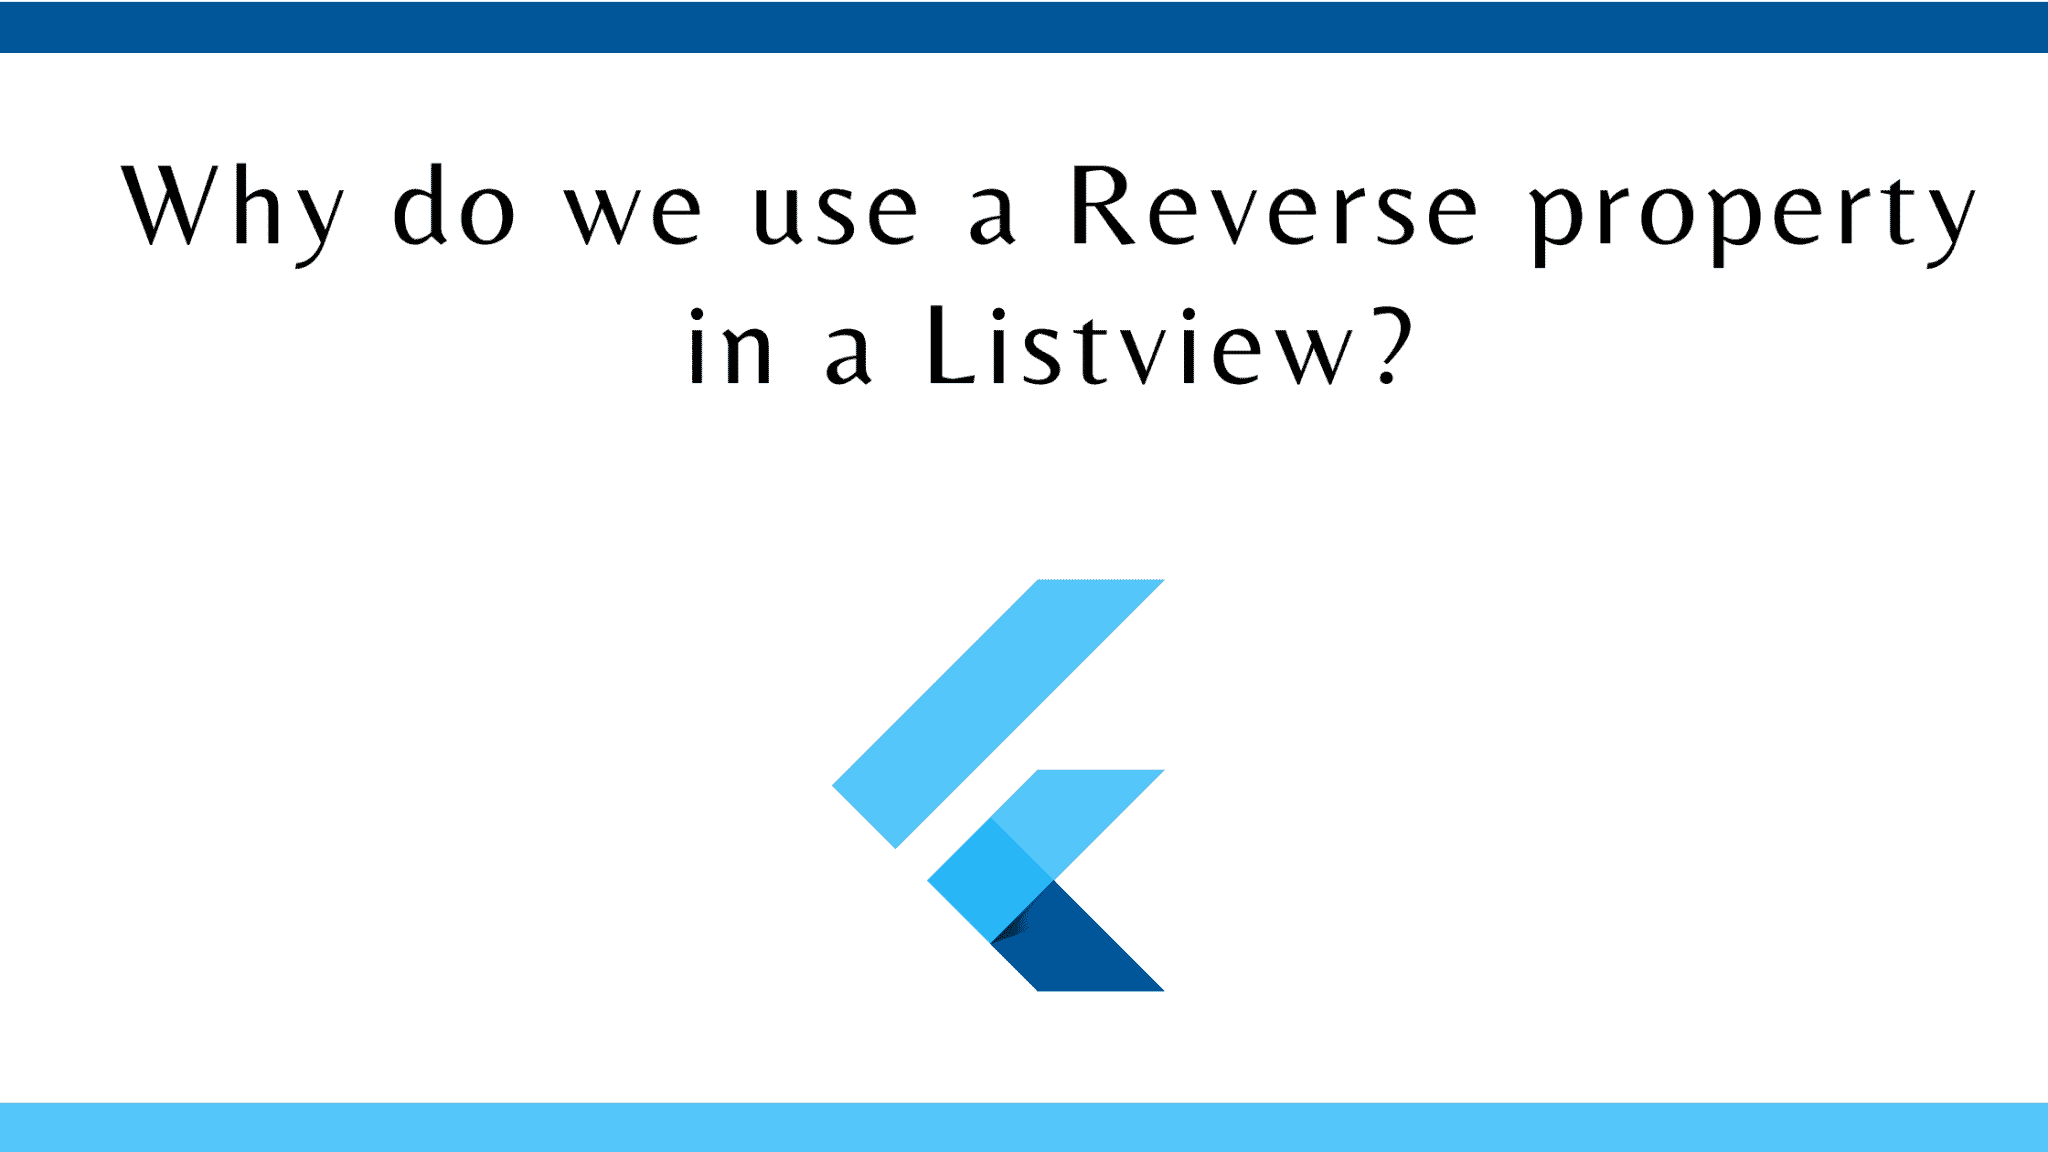 Why do we use a Reverse property in a Listview?